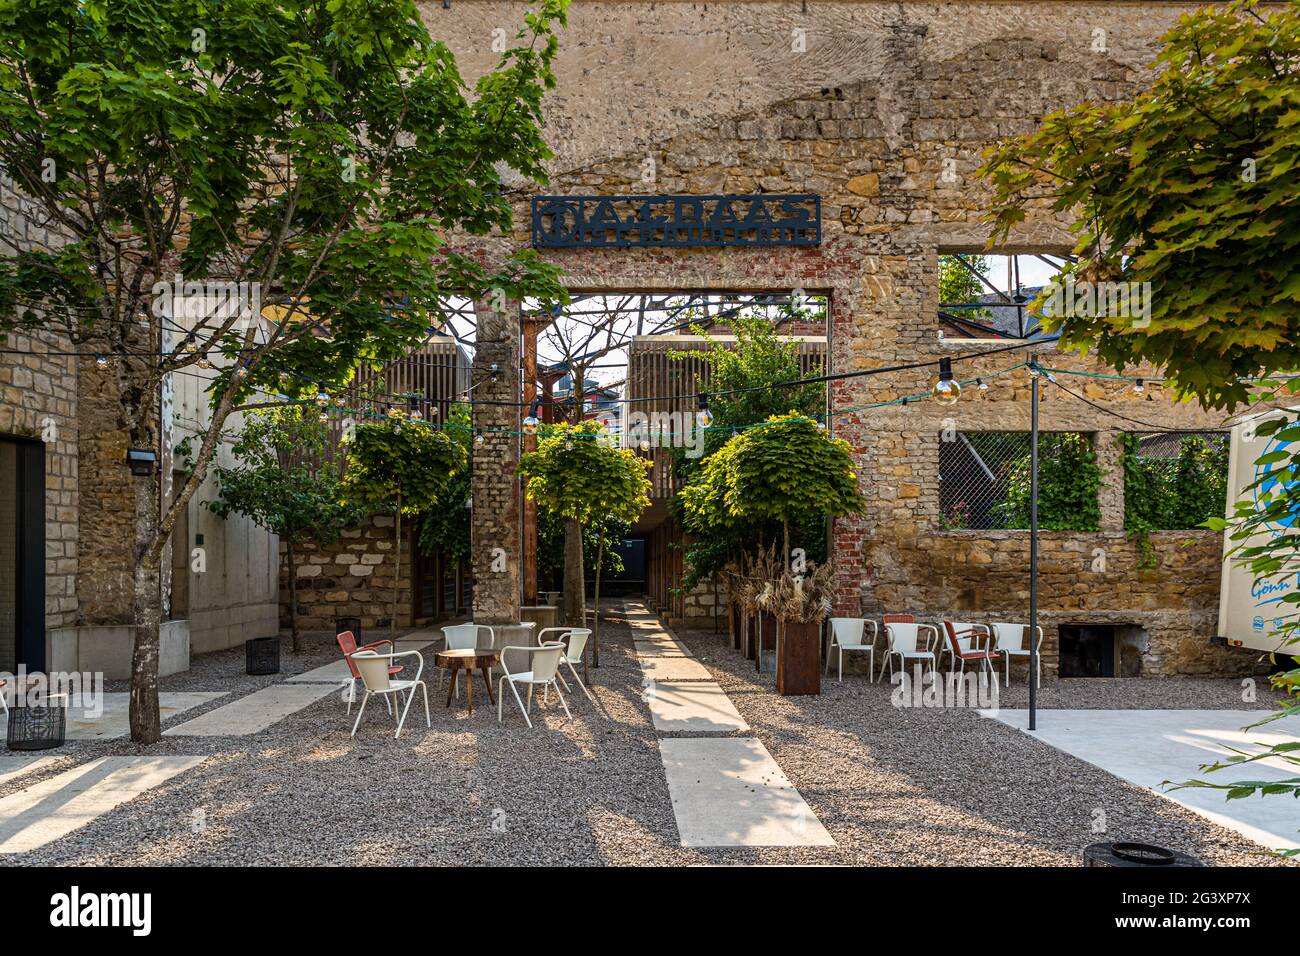 Hotel Graace in Luxembourg City. New hotel concept in old industrial hall. Where steel was once processed, there are now hotel rooms on two floors and four roof terraces with urban gardening, a tea store and a food truck in the courtyard. Stock Photo